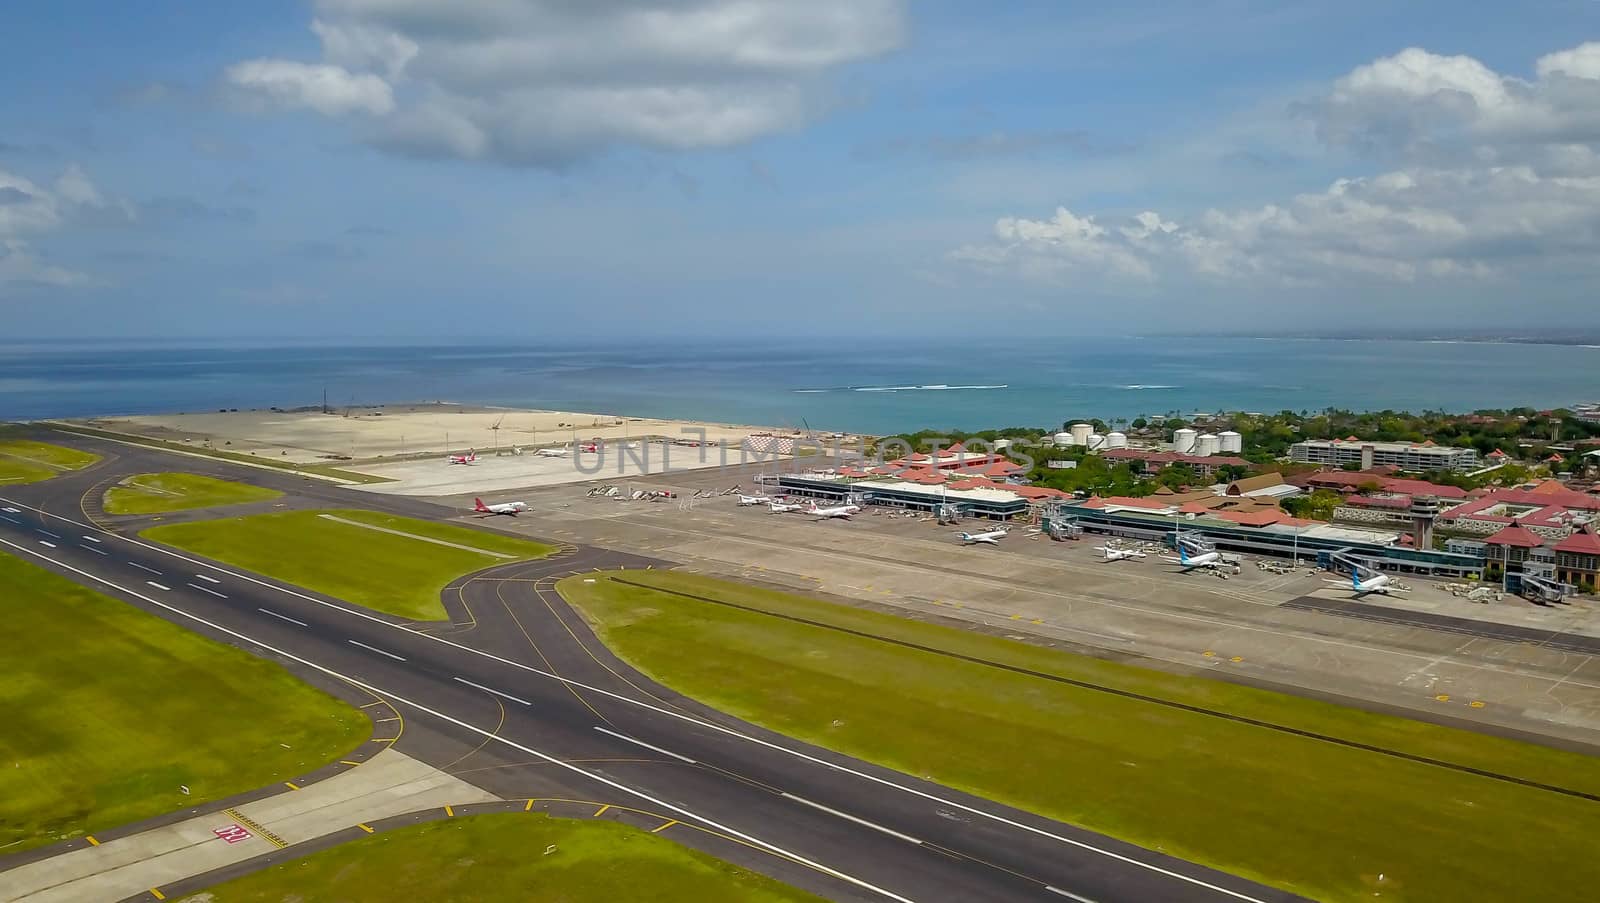 Airplane Parked on Ngurah Rai Airport Apron. Aerial view to international airport vith planes.